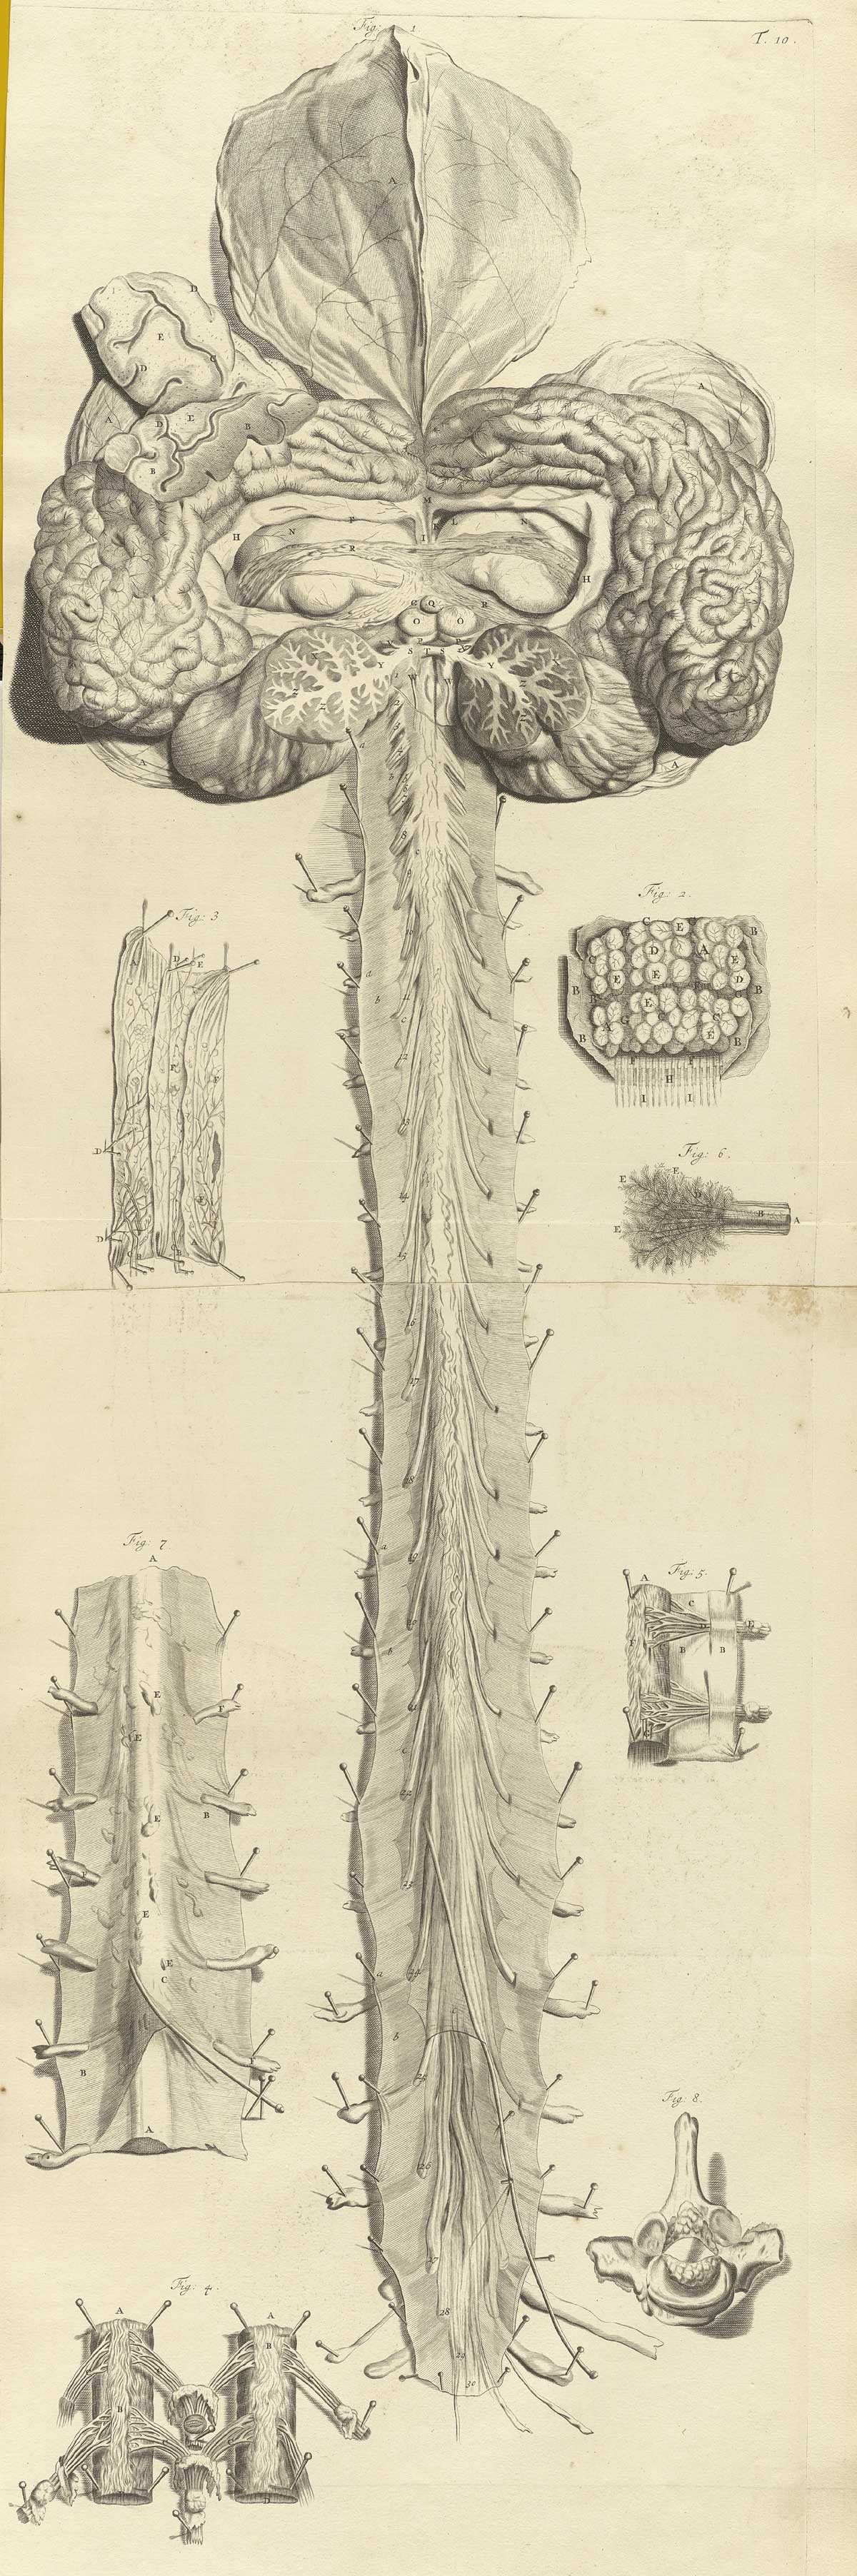 Engraving of a dissected brain and spinal column spread out on a dissecting table using pins; the brain, at the top of the long vertical image, is entire and cut in half down the middle with each half spread to the left and right exposing the interior; the spinal column is without the vertebrae, exposing the nerves and thin protective membranes surrounding them; from Govard Bidloo’s Ontleding Des Menschelyken Lichaams, Amsterdam, 1690, NLM Call no. WZ 250 B5855anDu 1690.